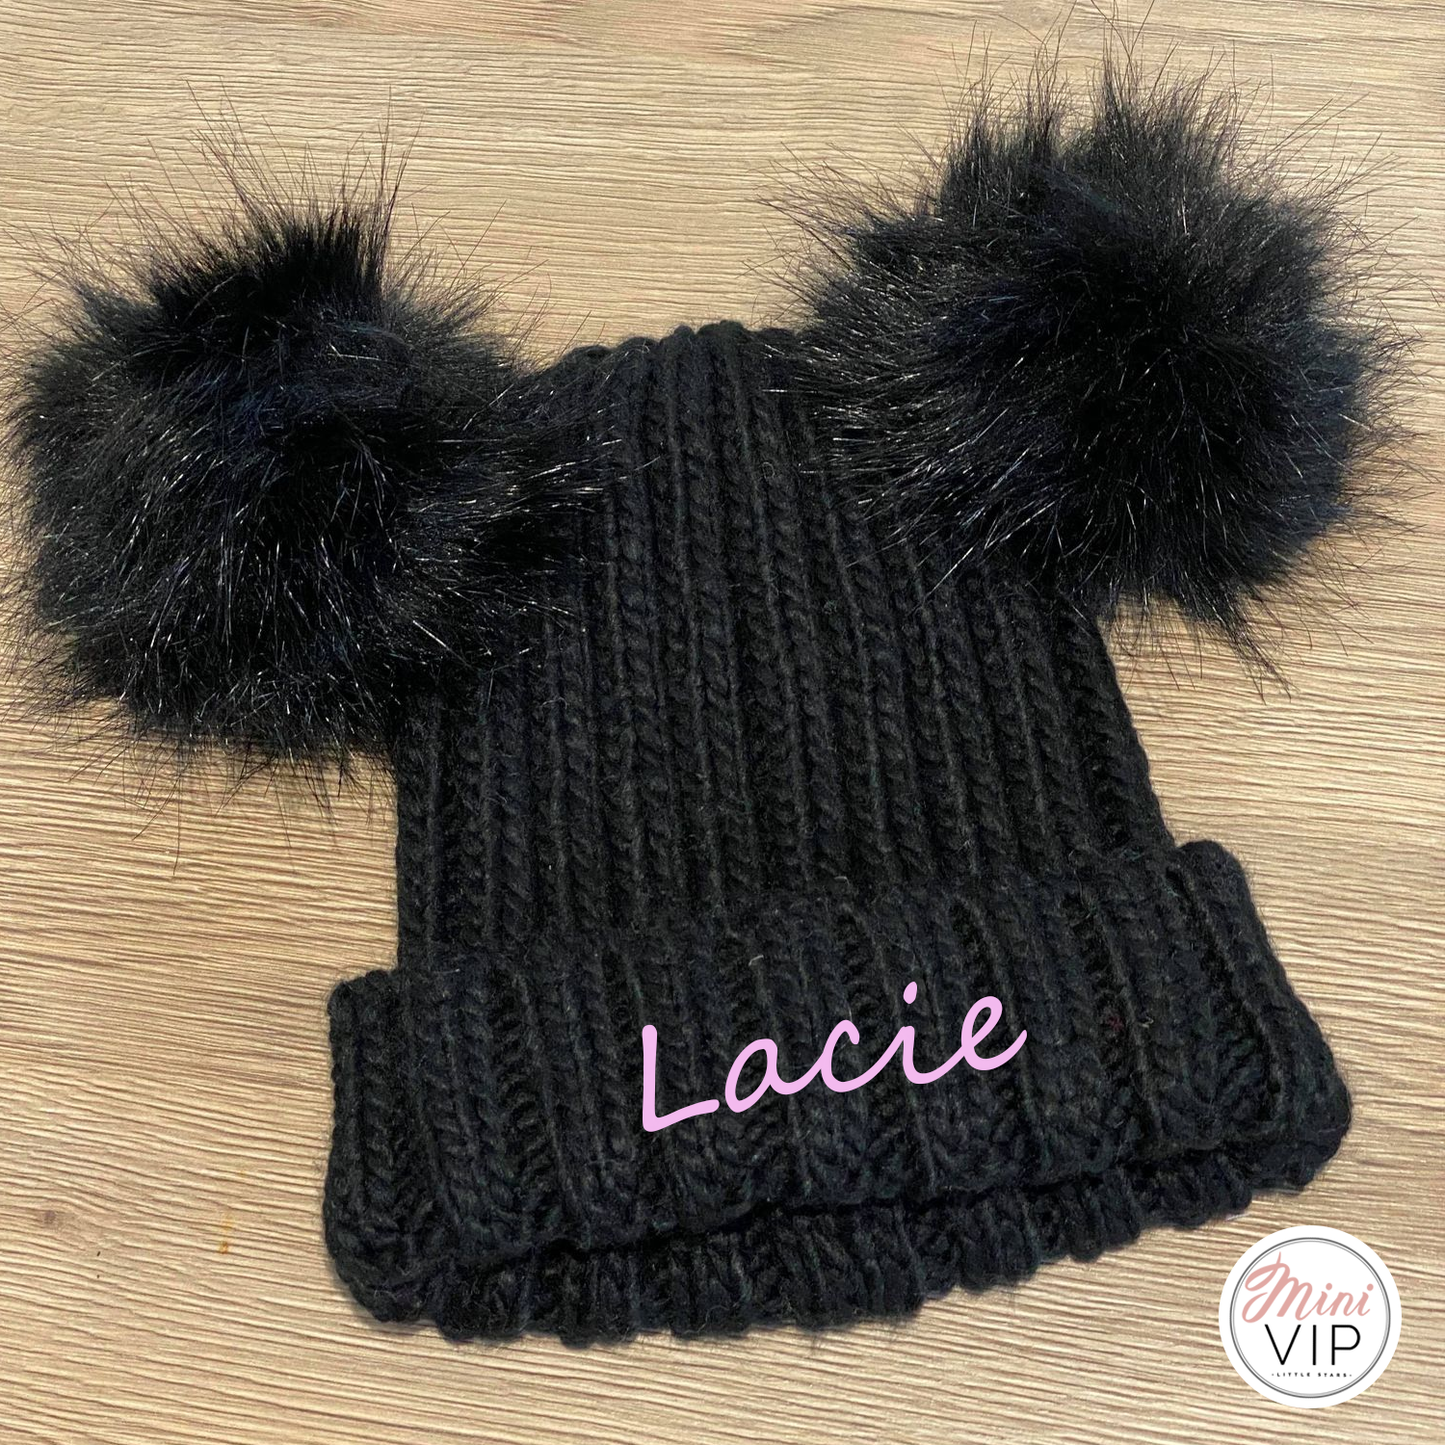 Personalised Double Black Pom Pom Embroidered Beanie Hat - Infants, Junior & Adult sizes